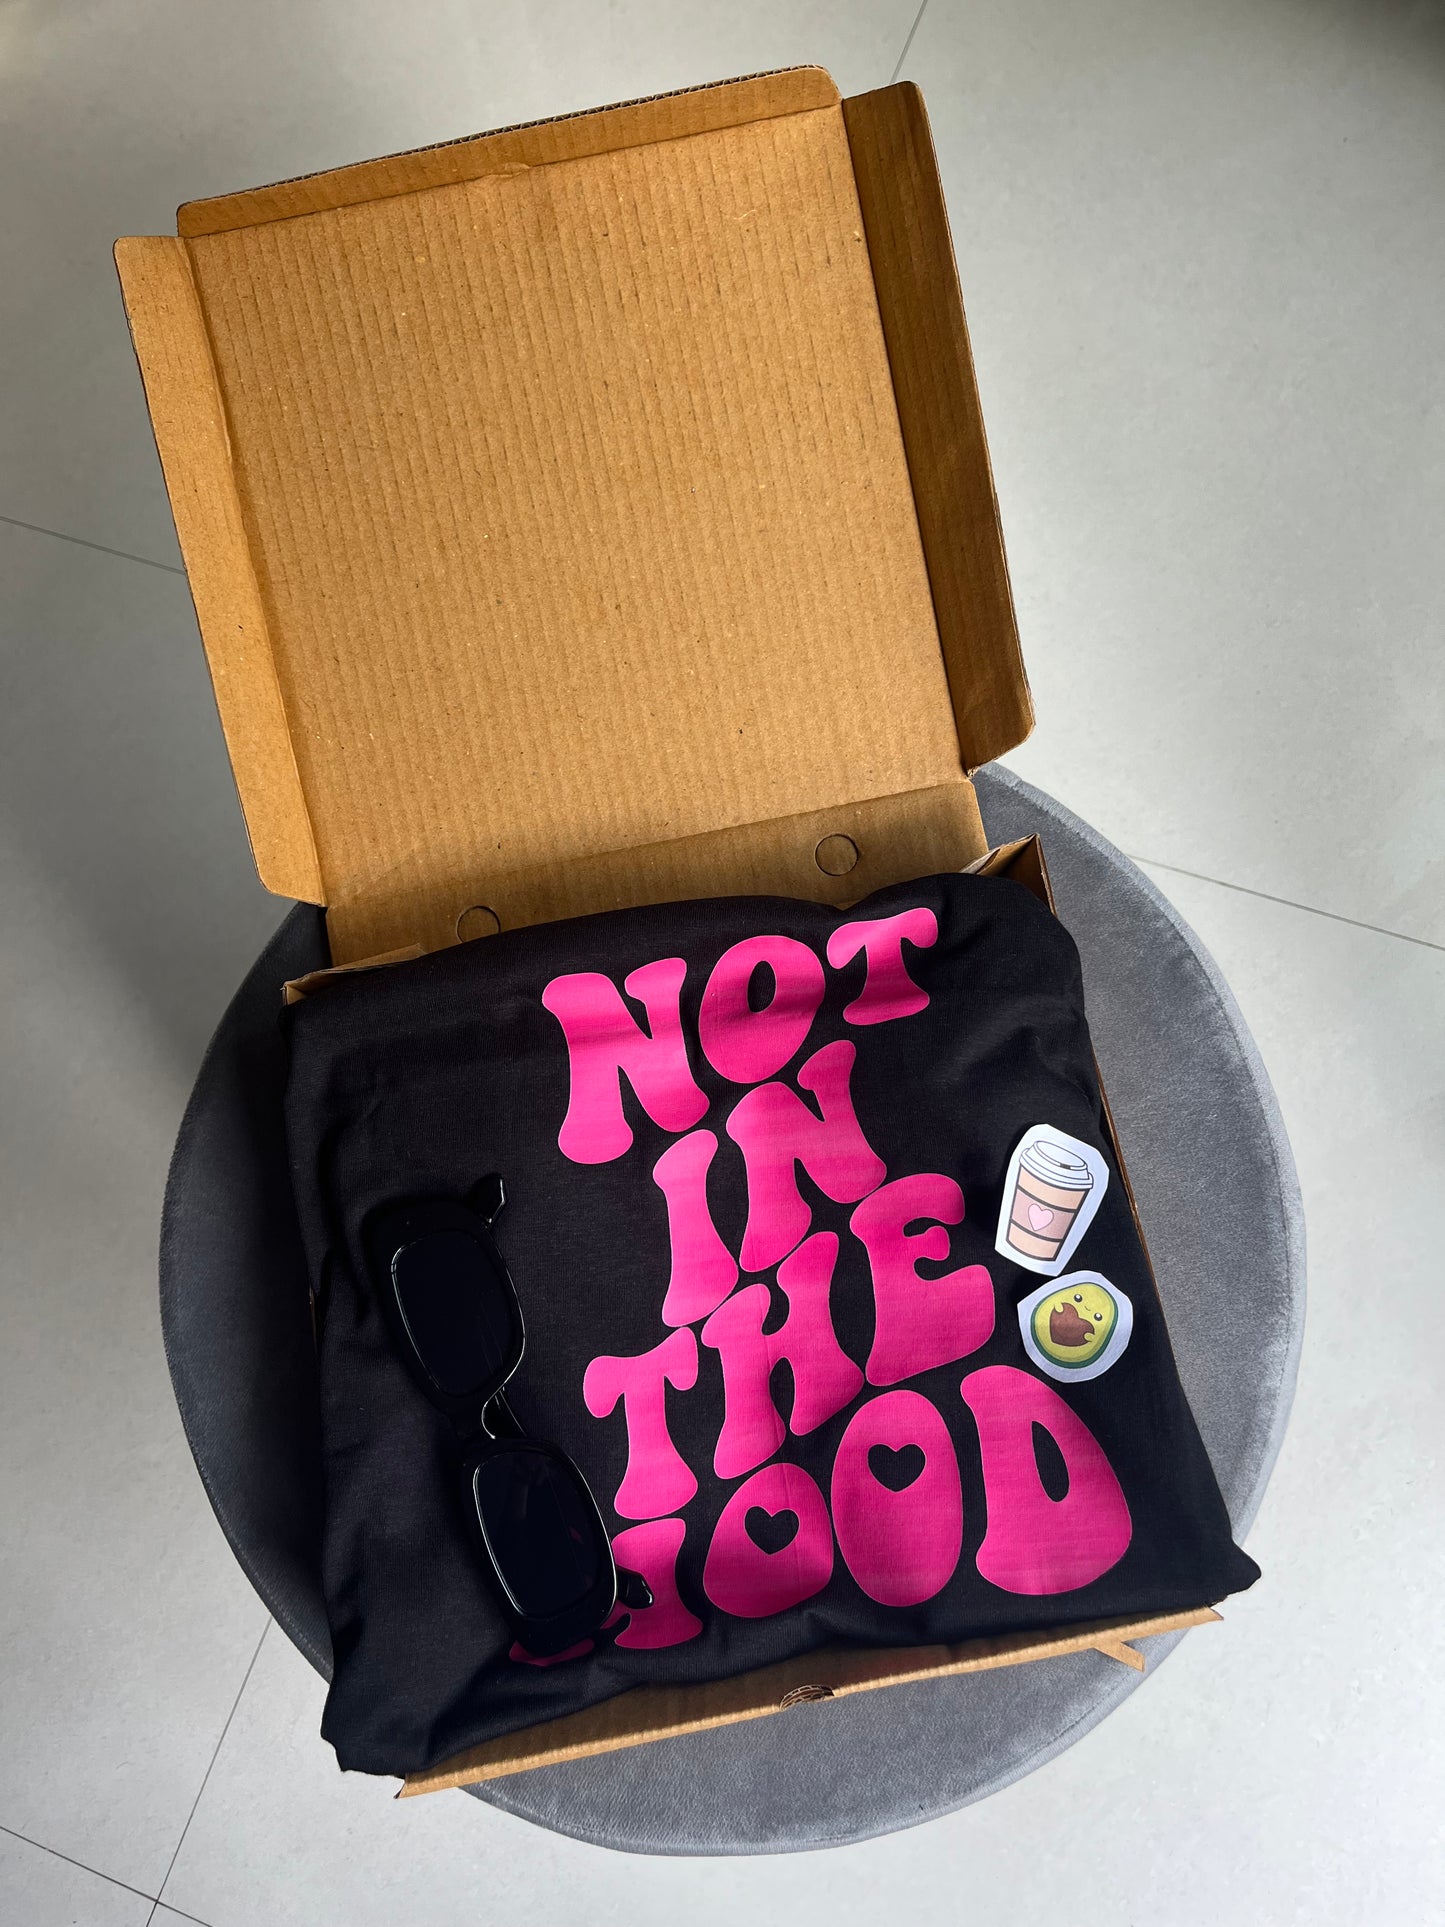 Not in the mood outfit box